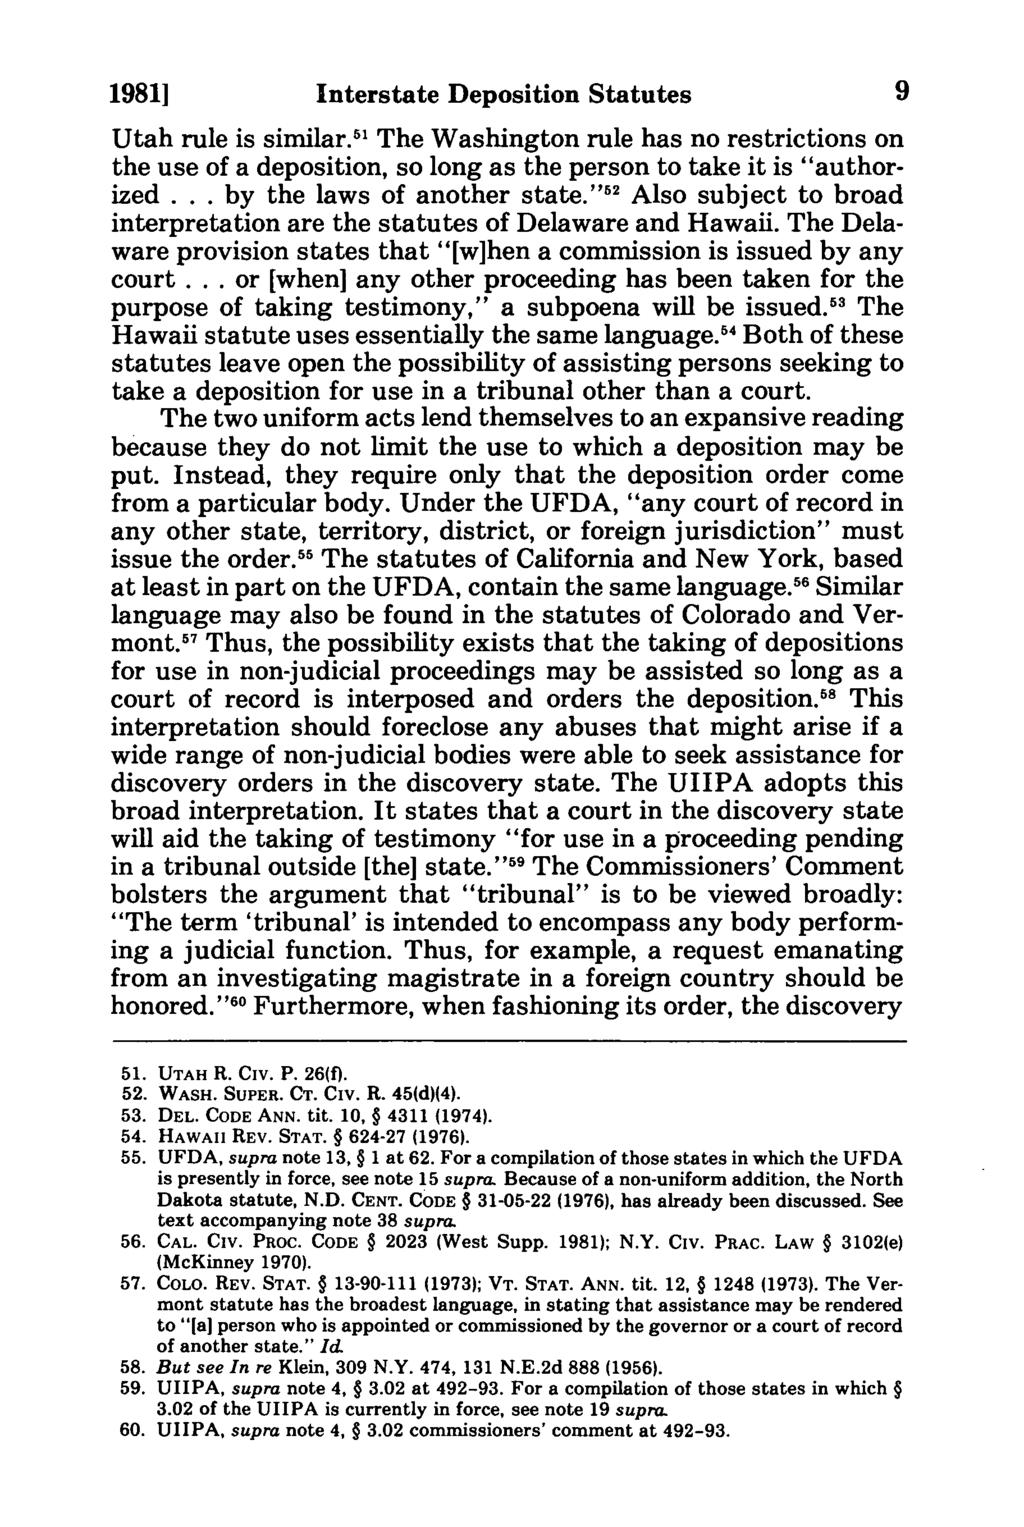 1981] Interstate Deposition Statutes Utah rule is similar. 51 The Washington rule has no restrictions on the use of a deposition, so long as the person to take it is "authorized.